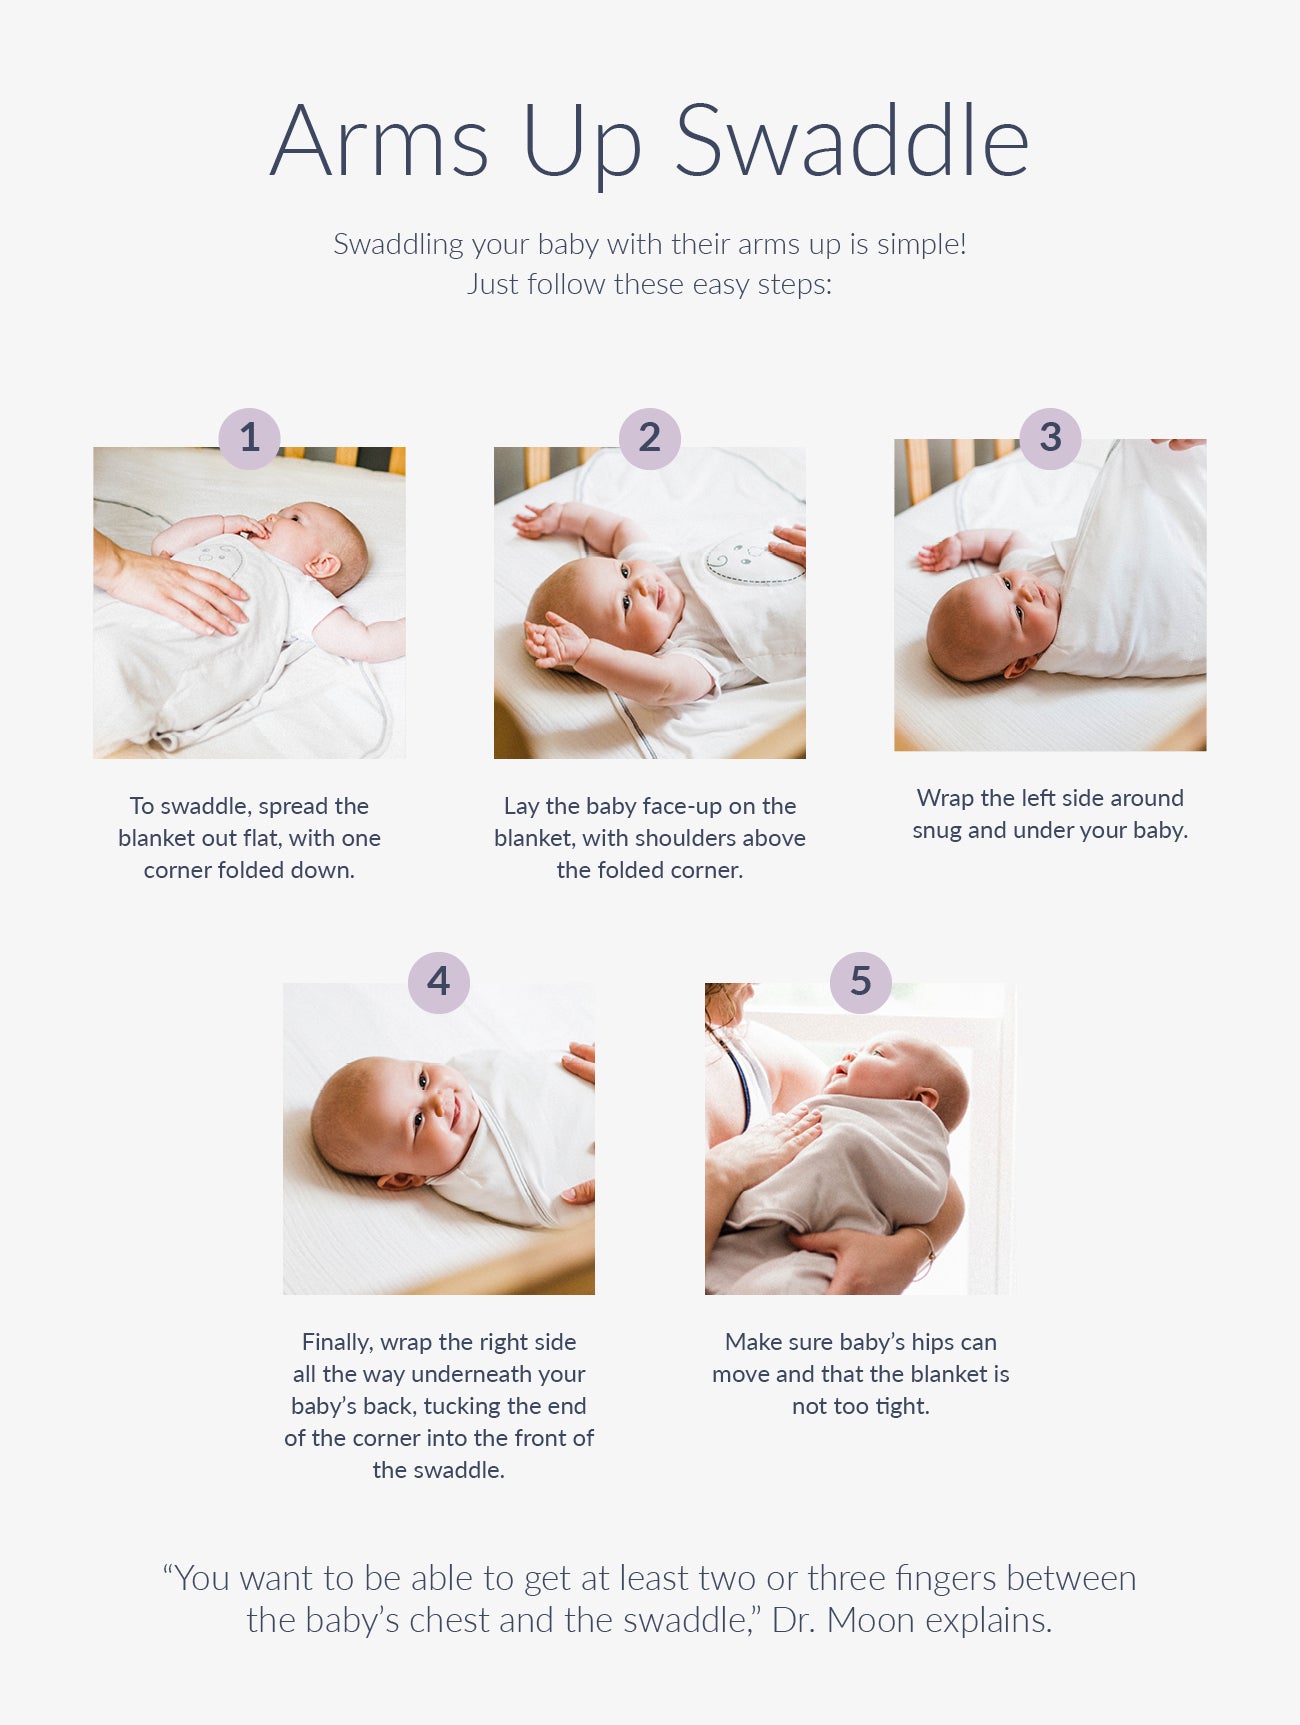 arms up swaddle infographic